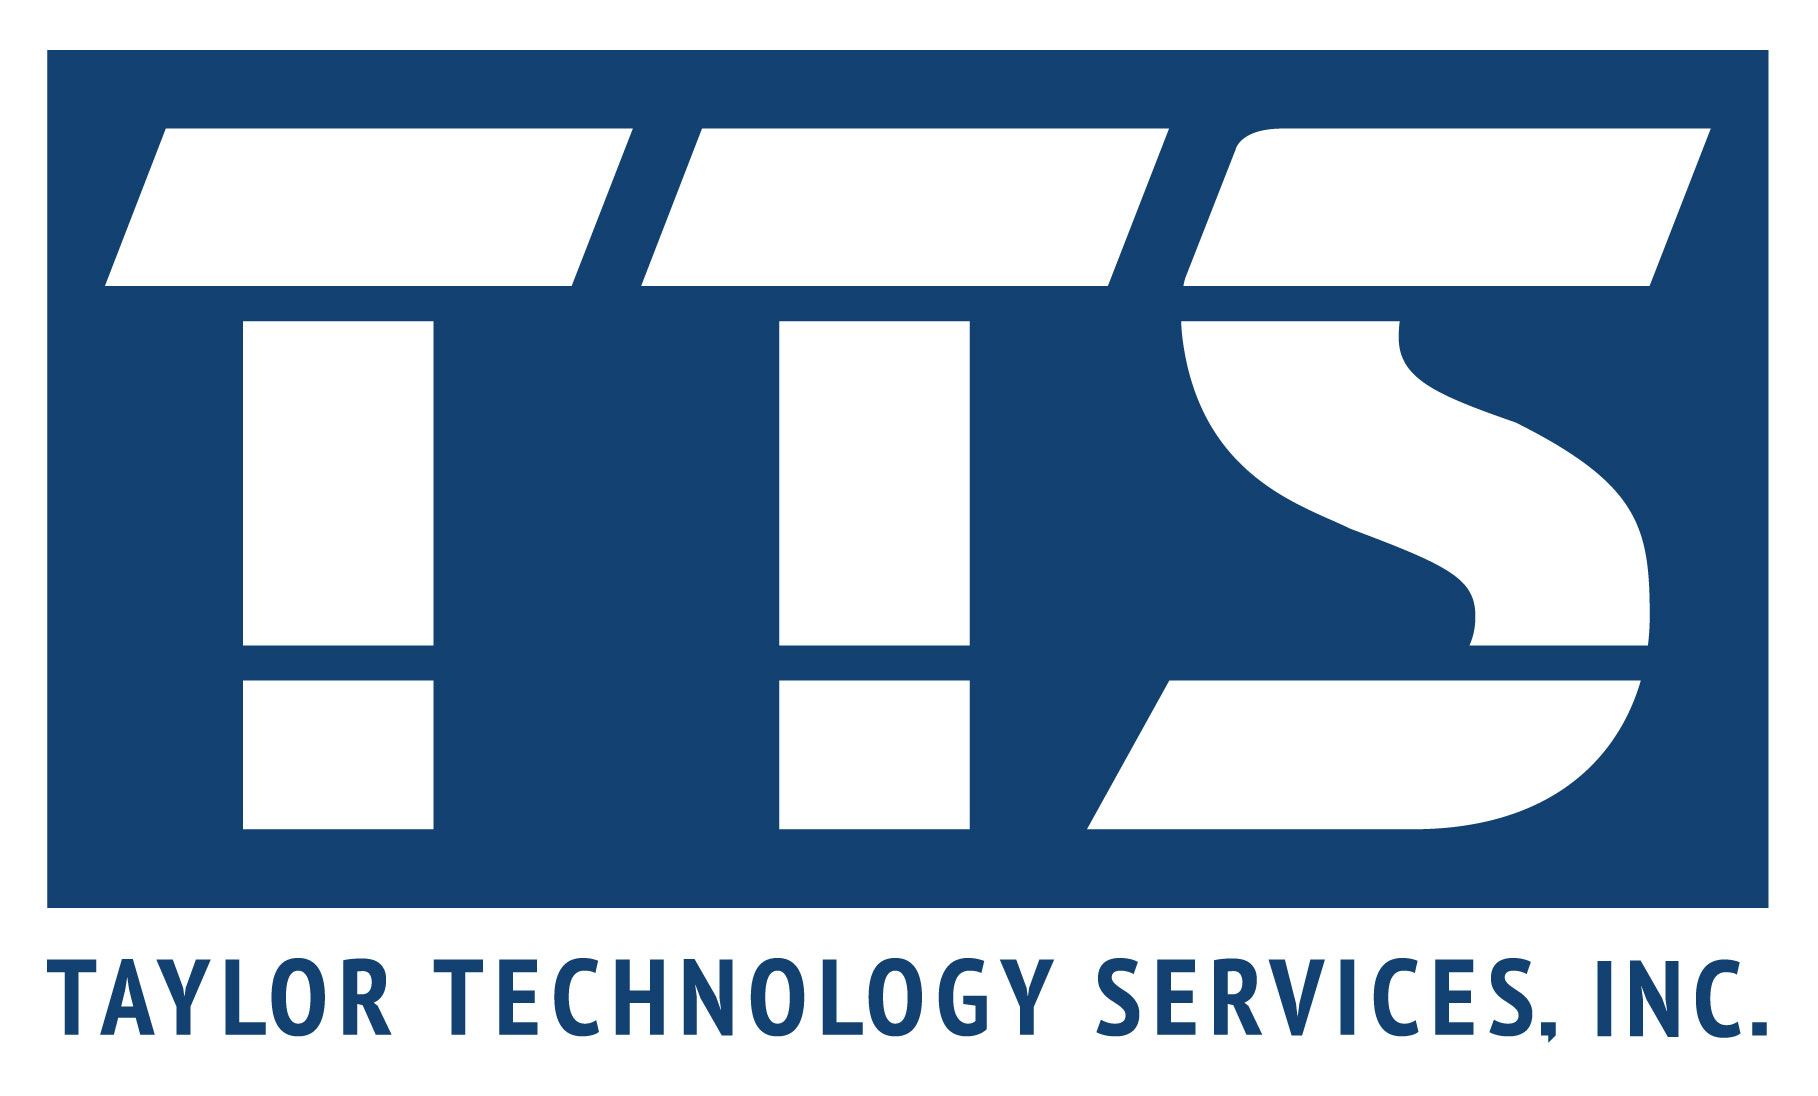 Taylor Technology Services